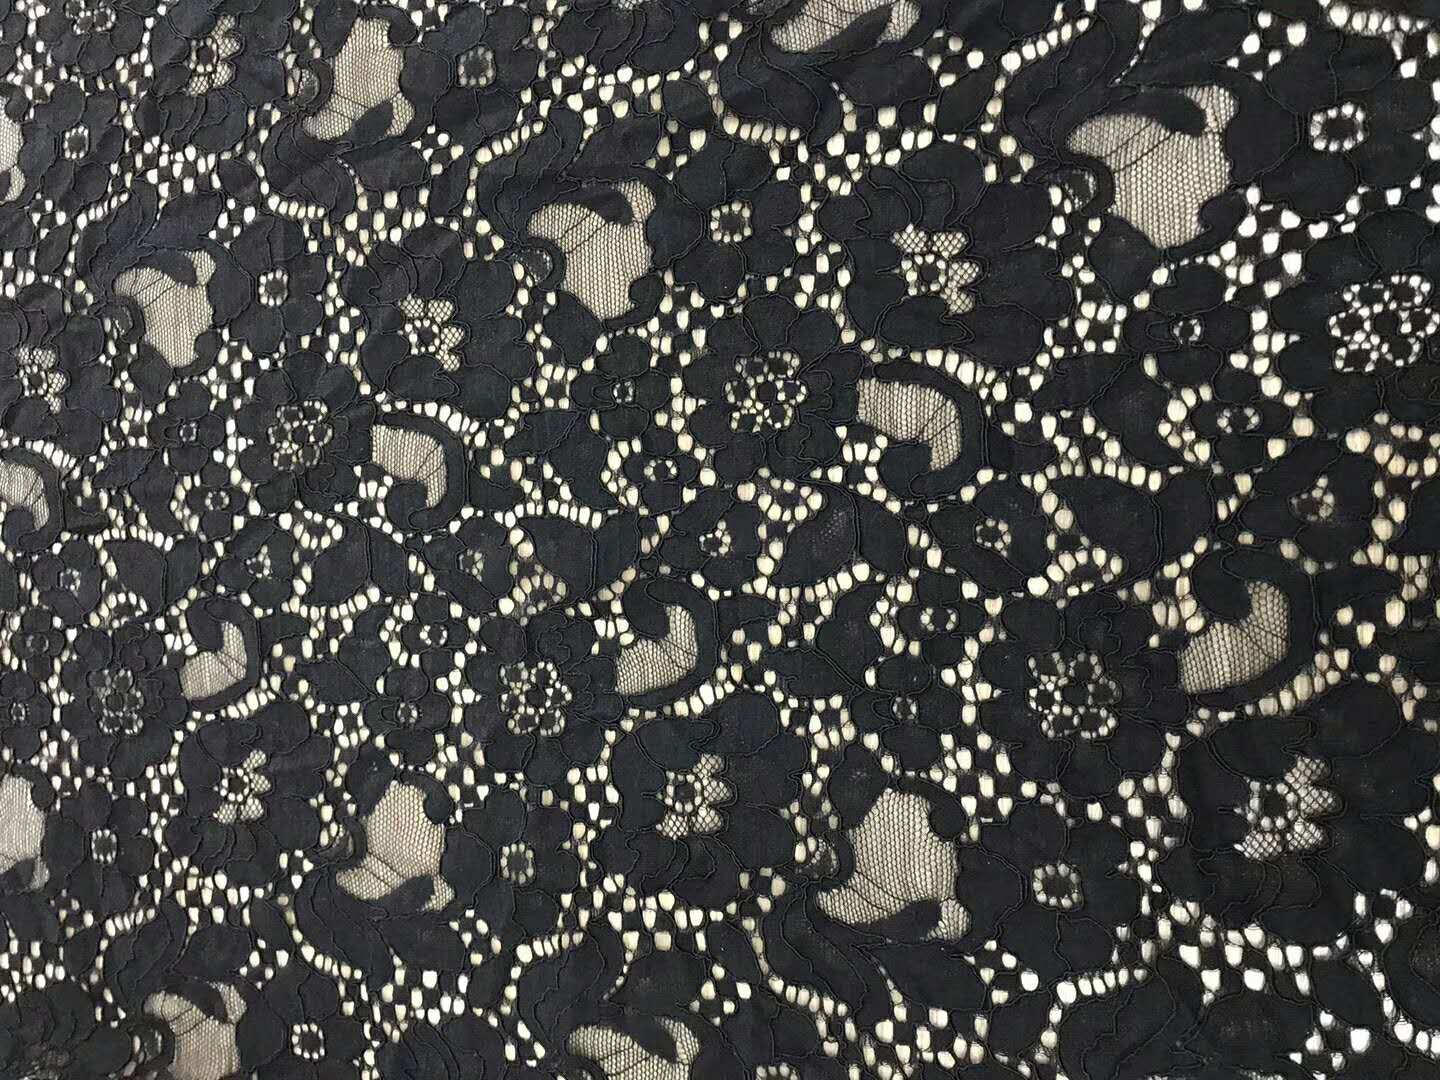 2018 New Style More Design Embroidered Fabric for Hometextile